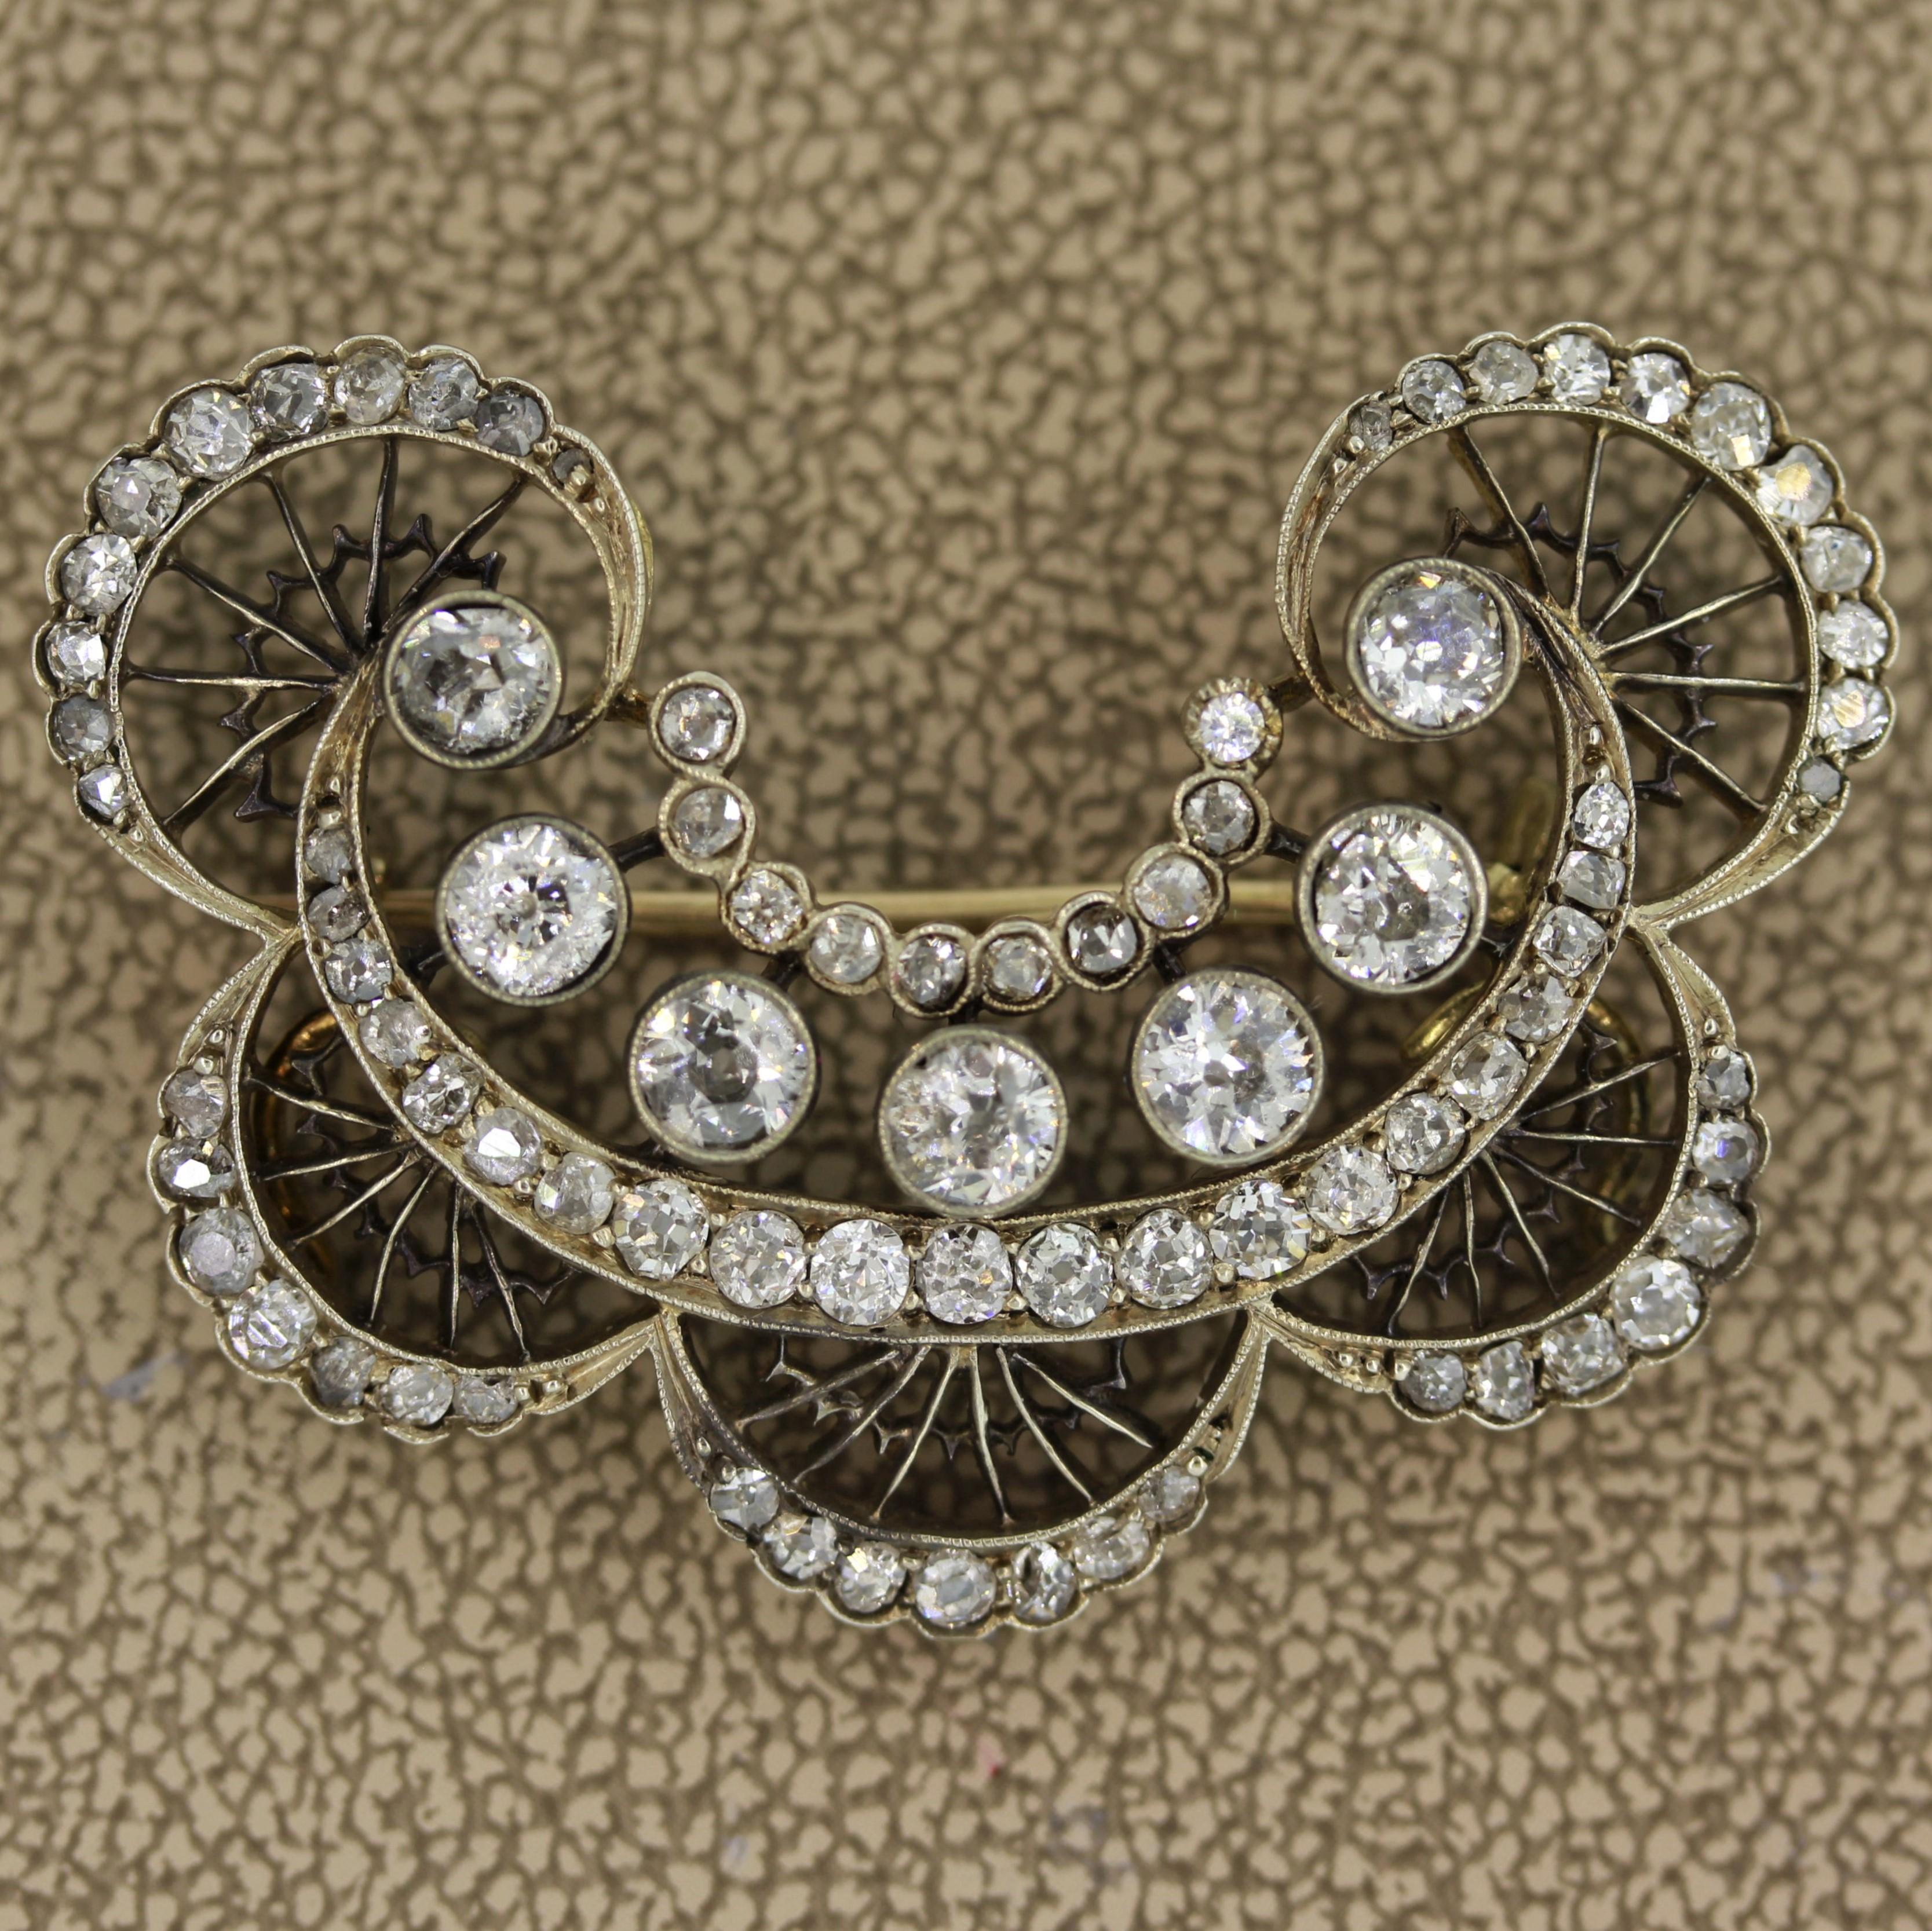 Circa 1895, this antique brooch from the late Victorian era features a total of approximately 2.35 carats of European cut diamonds. This piece was hand made in 14k yellow gold with a silver-topping to give it a white appearance. The pin is finished